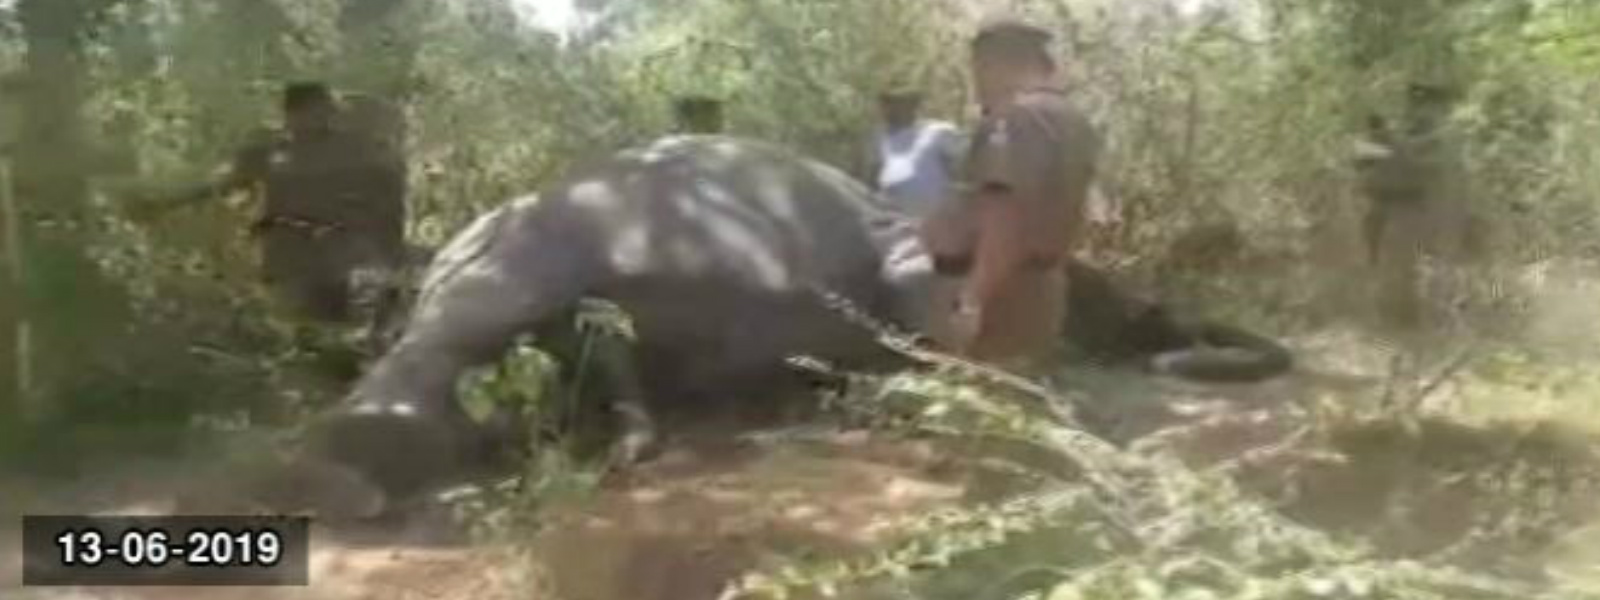 Remains of elephant discovered in Wellawaya